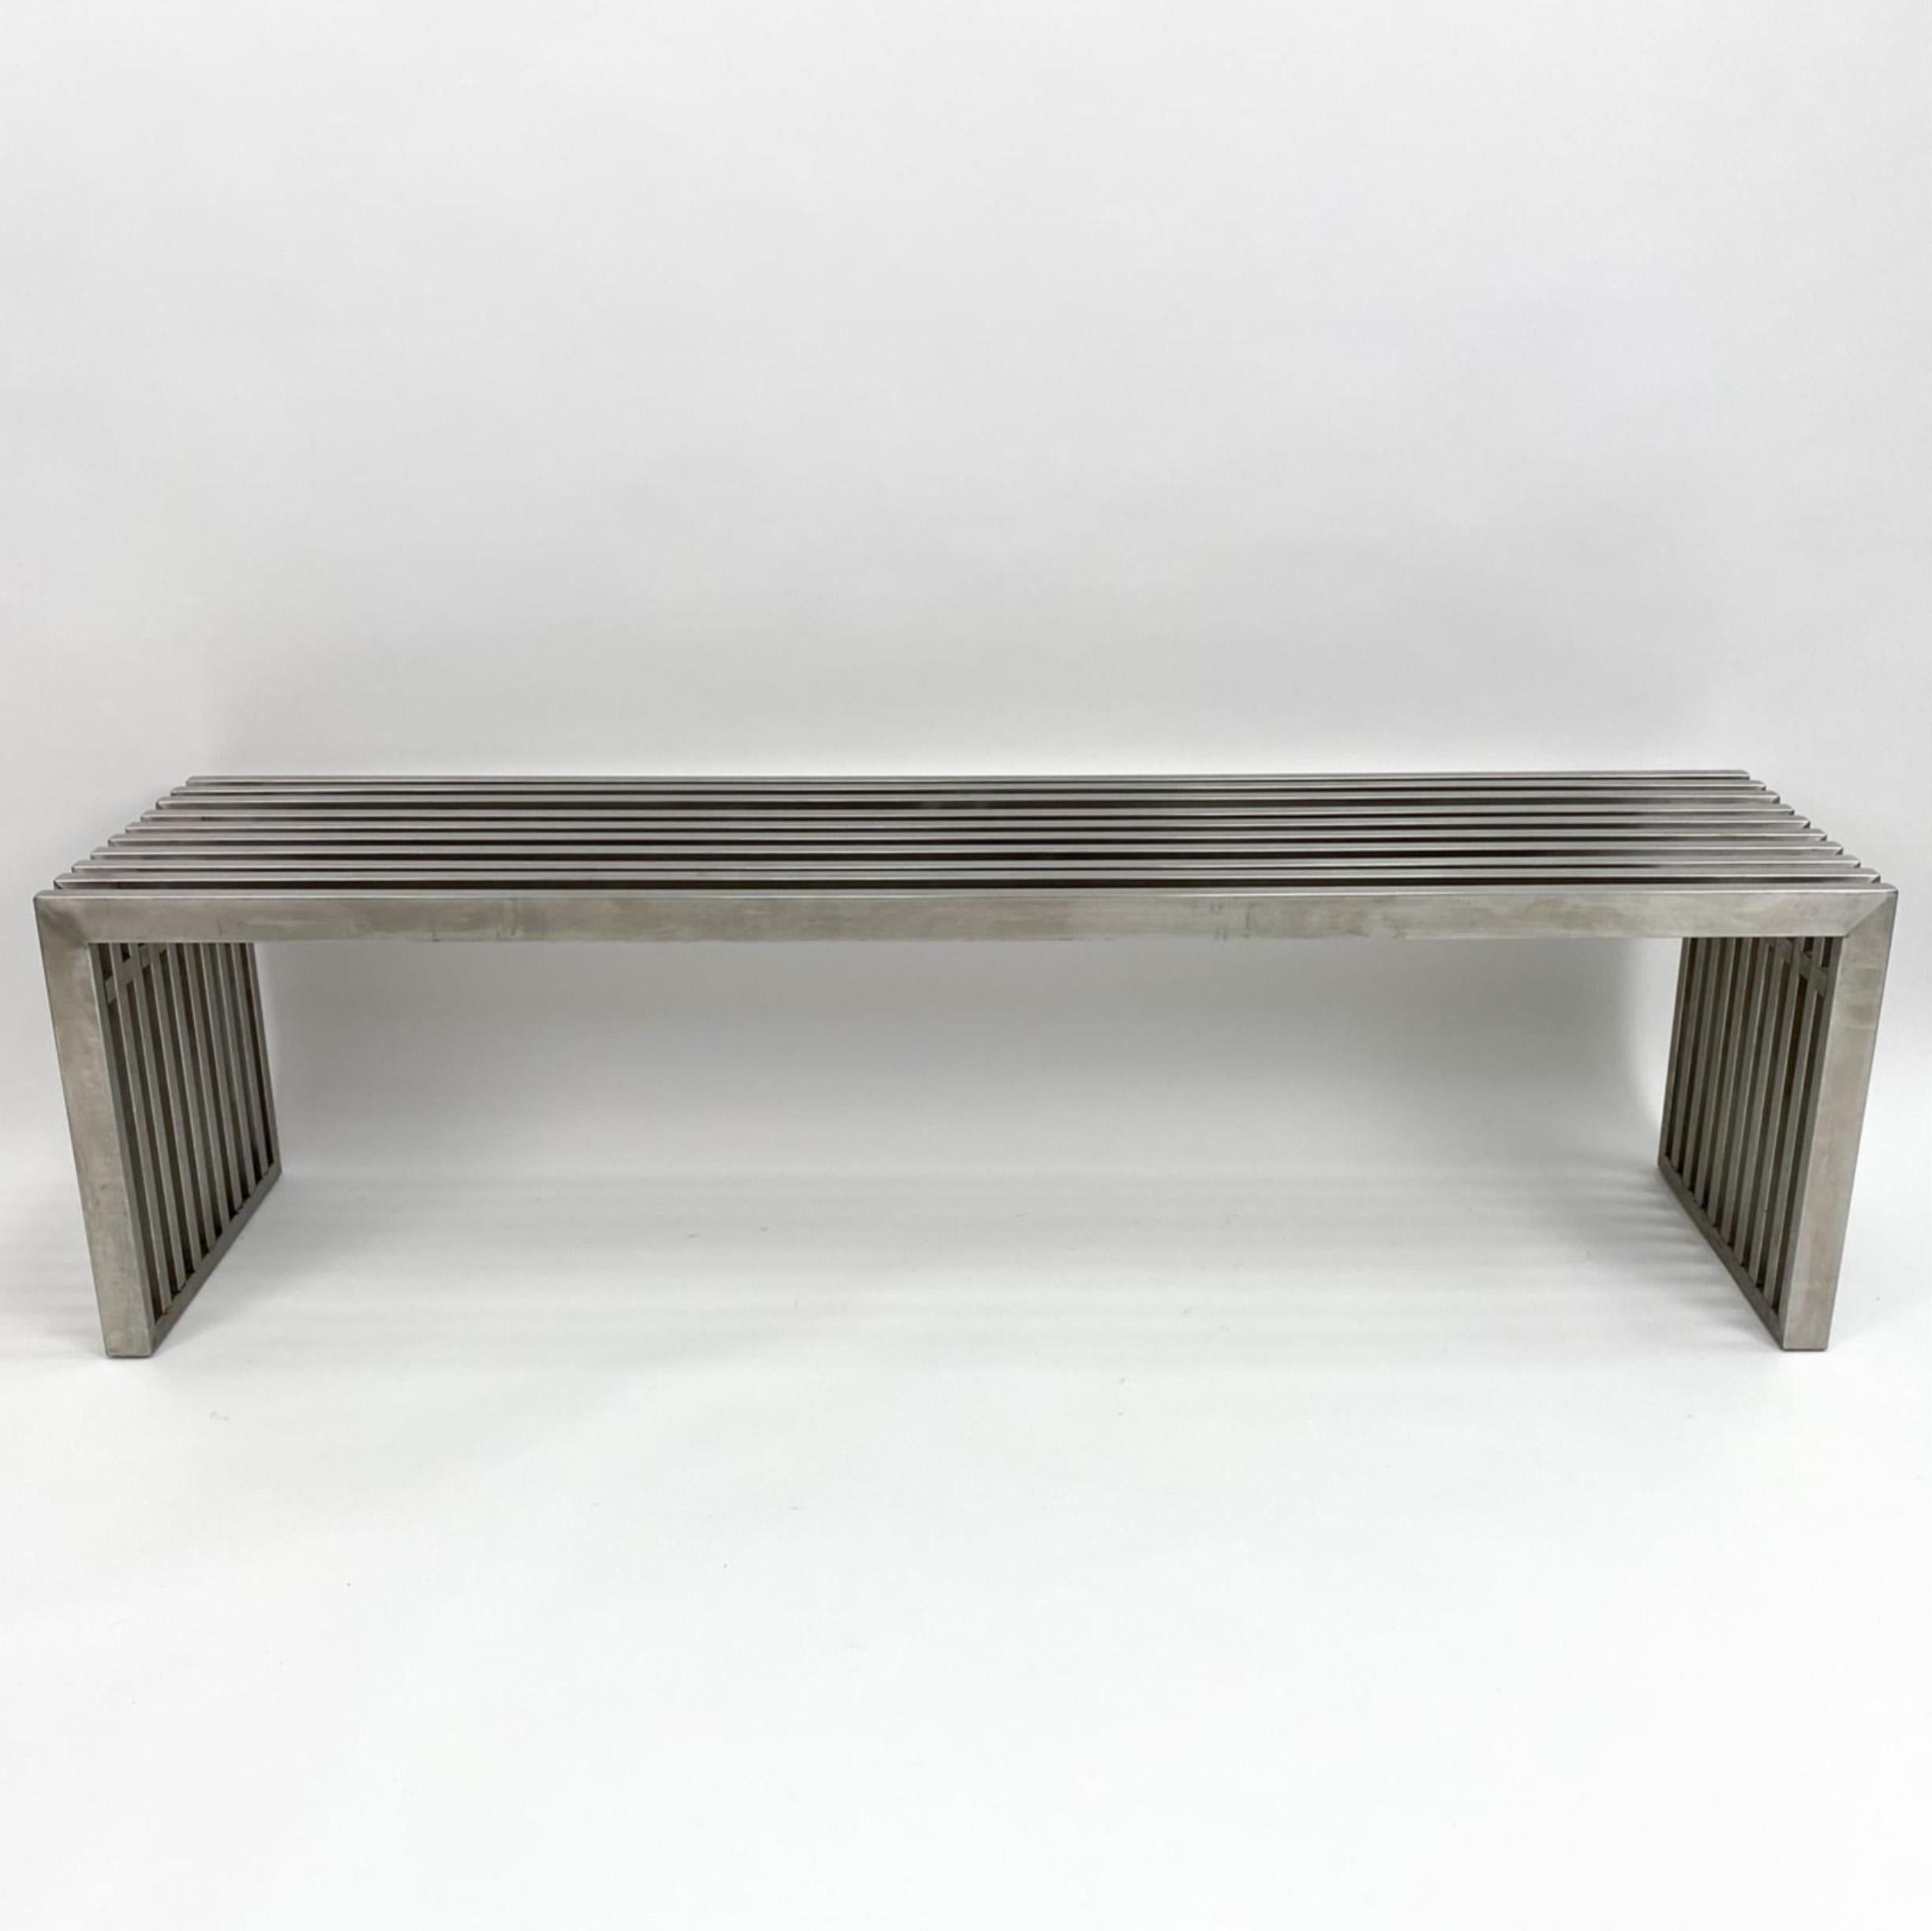 Sleek modernist metal slat bench in the manner of Milo Baughman. Chrome plated metal with metal spacers. The length of this bench measure 59